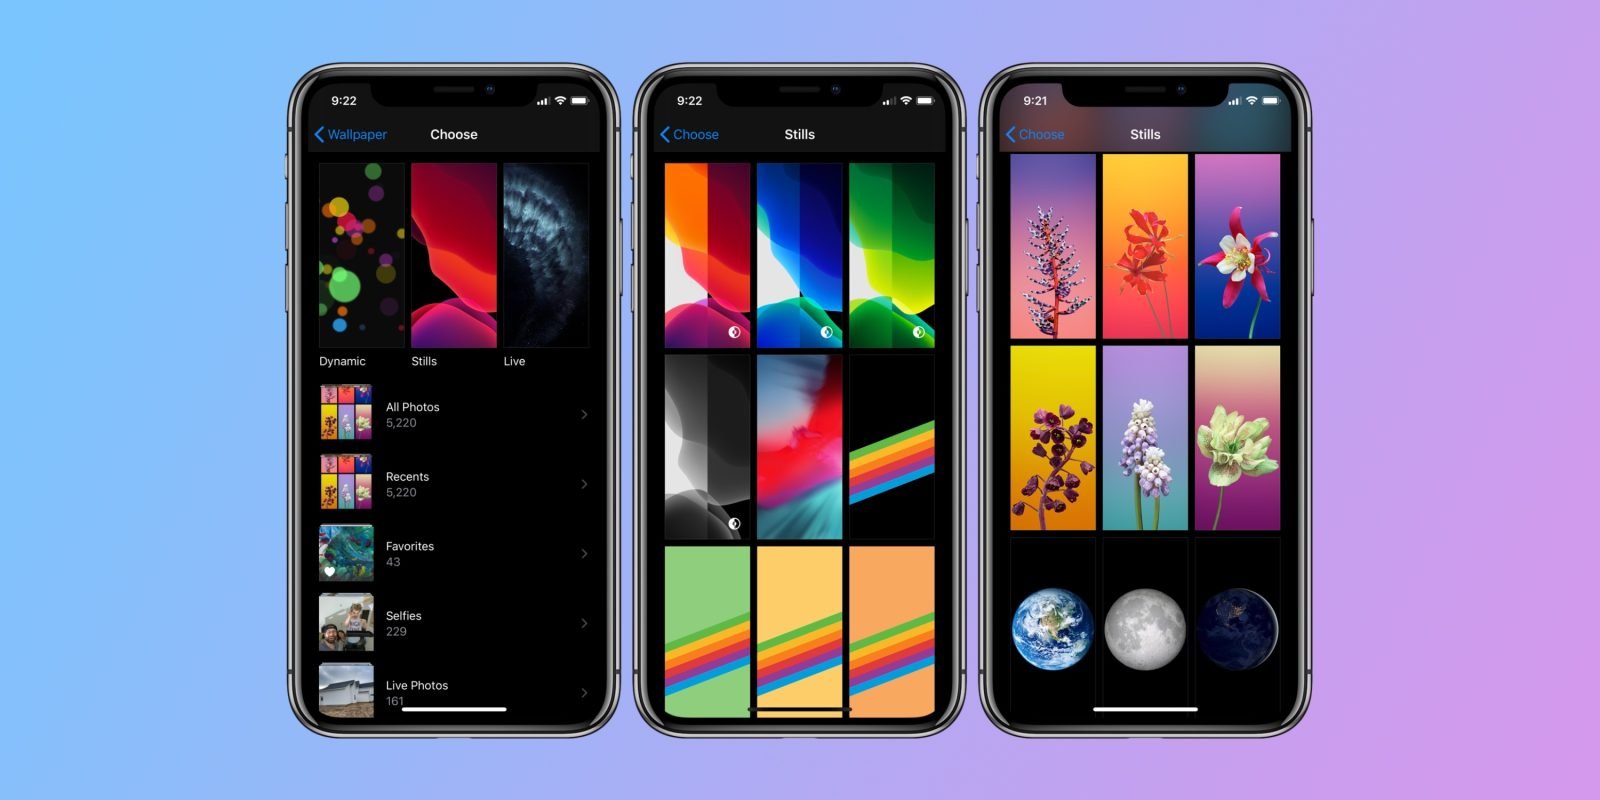 9to5Mac Exclusive: What do we know about iOS 14?